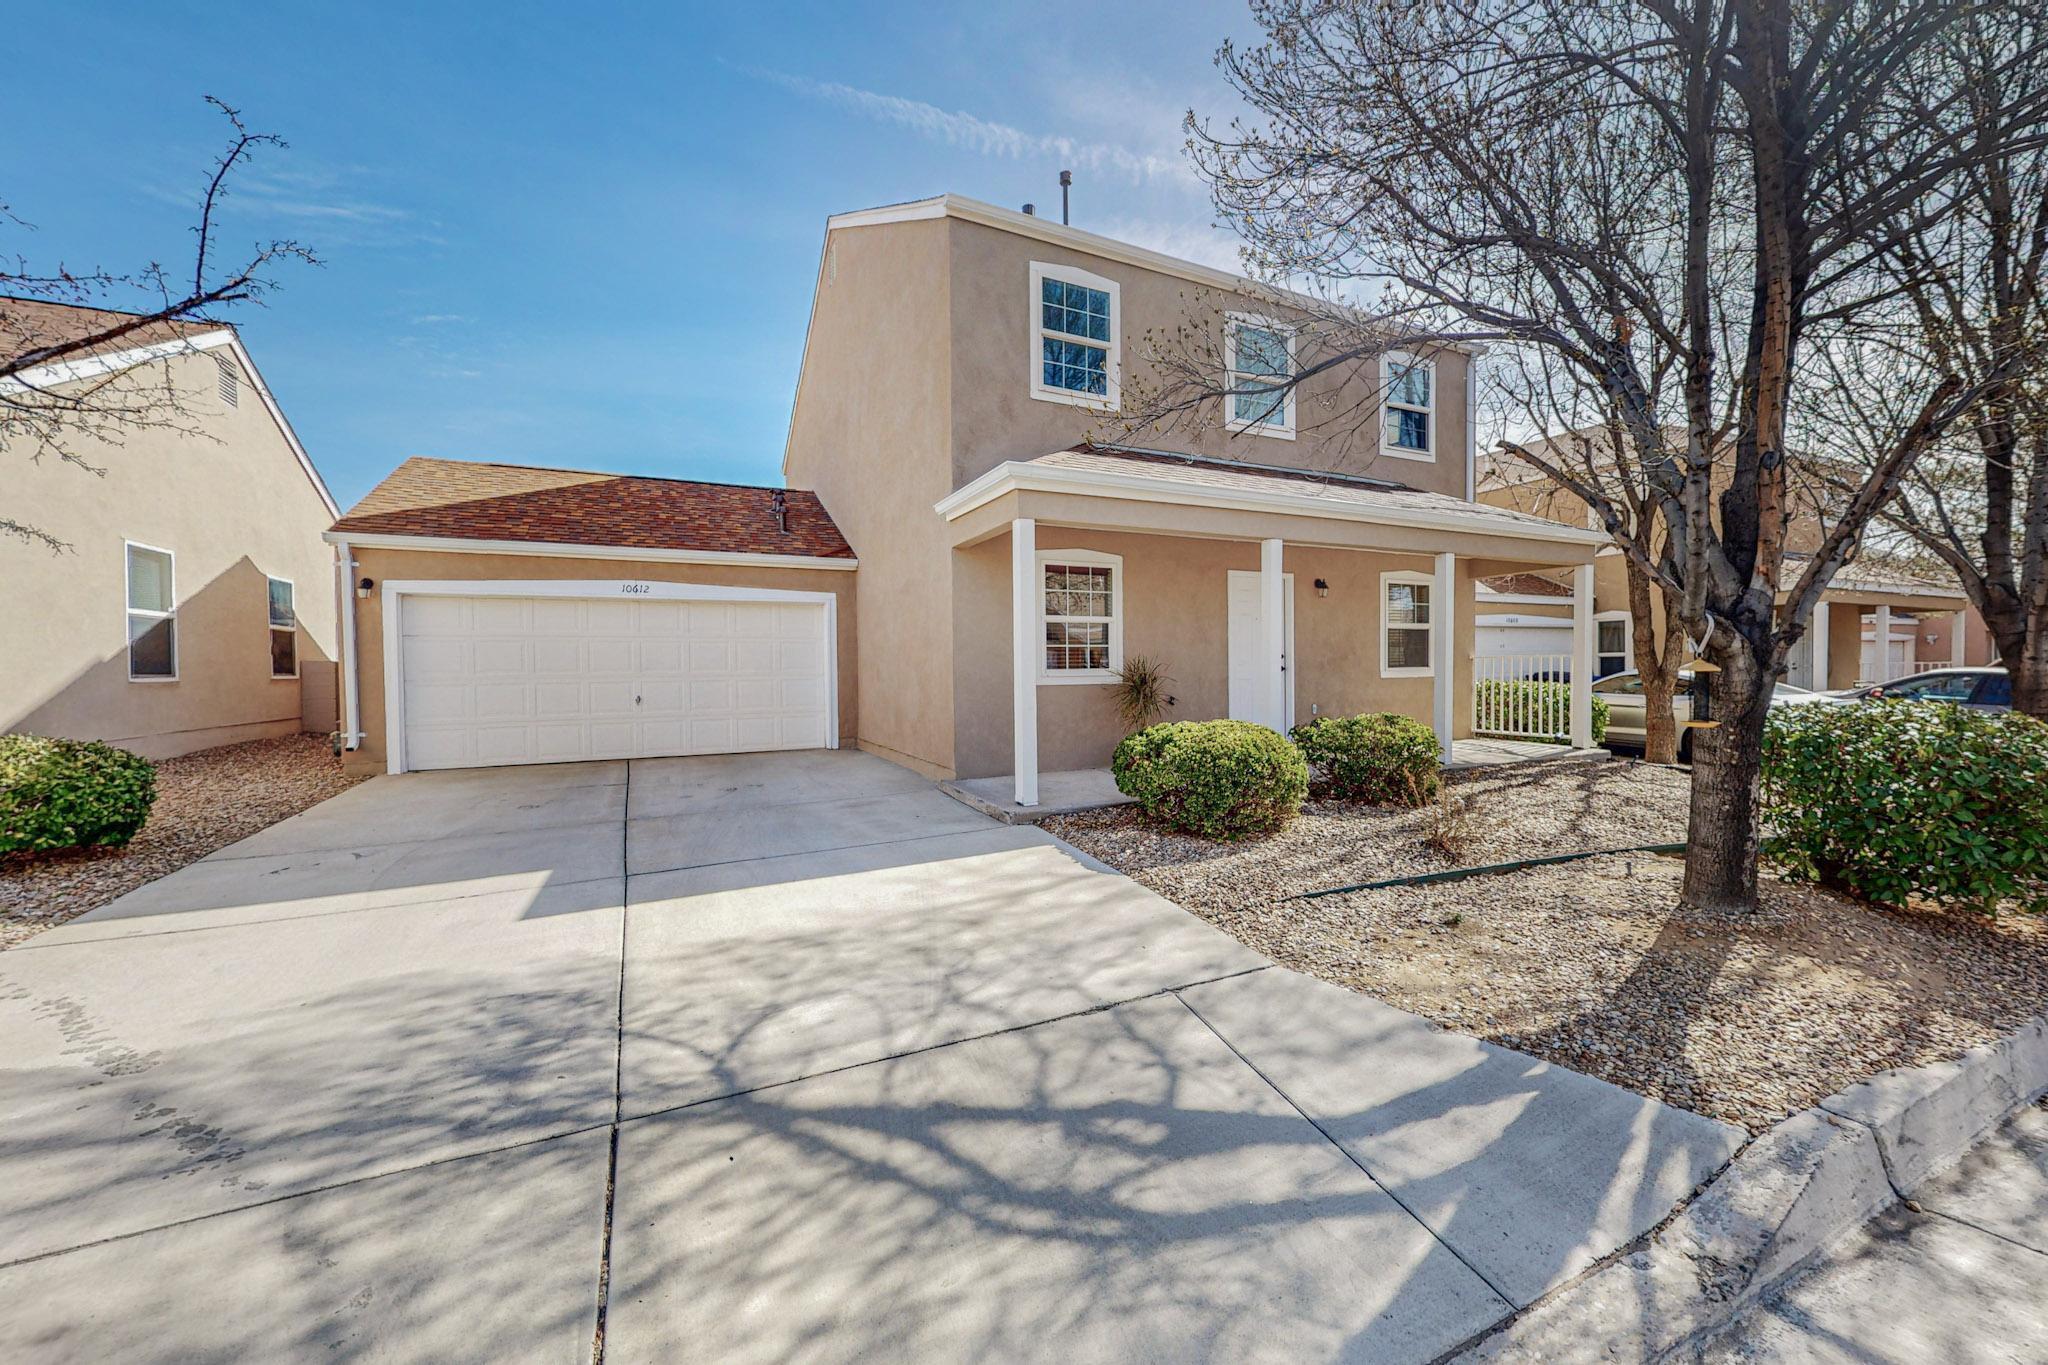 OPEN HOUSE MONDAY MARCH 11 FROM 12:00-2:00 PM!!! Welcome to this stunning two-story home located in a prime area of Albuquerque, surrounded by a plethora of convenient amenities. This beautiful home is situated in close proximity to shopping centers, a variety of dining options, reputable schools, and top-notch medical facilities. Additionally, it boasts easy access to picturesque parks and scenic walking trails, perfect for enjoying the outdoors.Upon stepping inside, you'll be greeted by a range of impressive updates, including modern countertops, stylish sinks, elegant cabinetry, and attractive flooring throughout. The abundance of natural light further enhances the inviting atmosphere of the home, creating a warm and welcoming